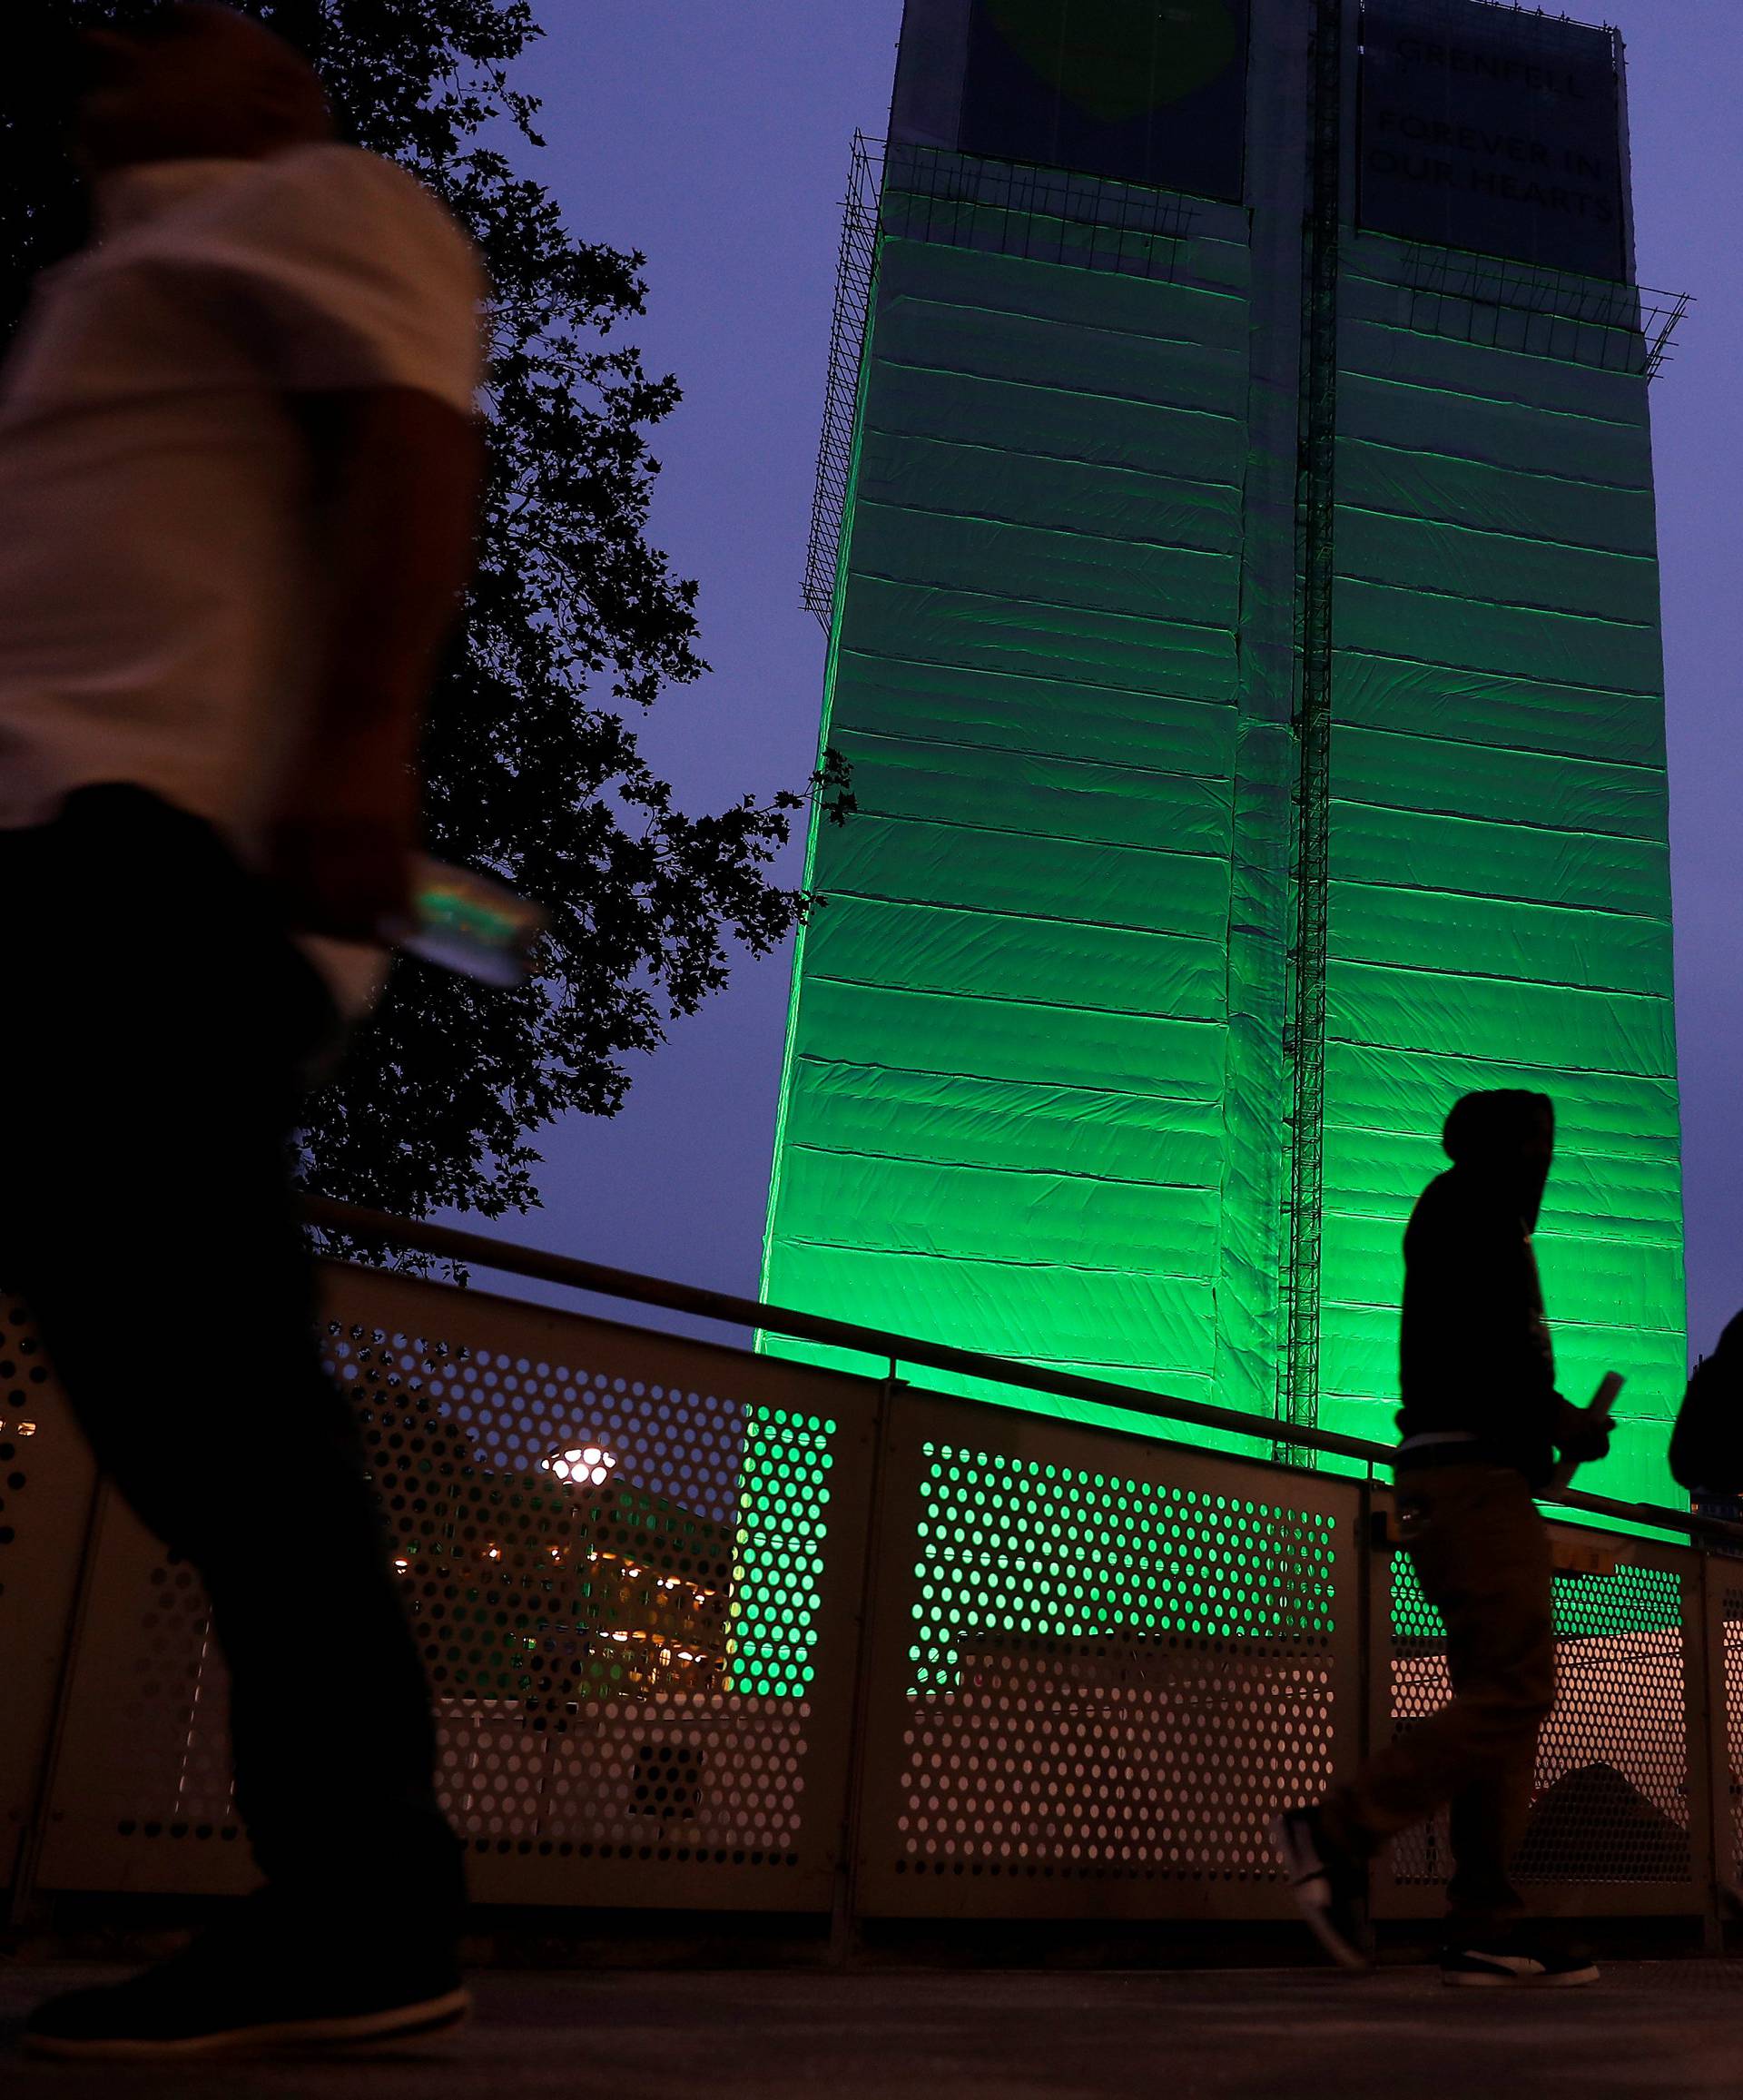 Grenfell Tower is seen covered and illuminated with green light one year after the tower fire in London